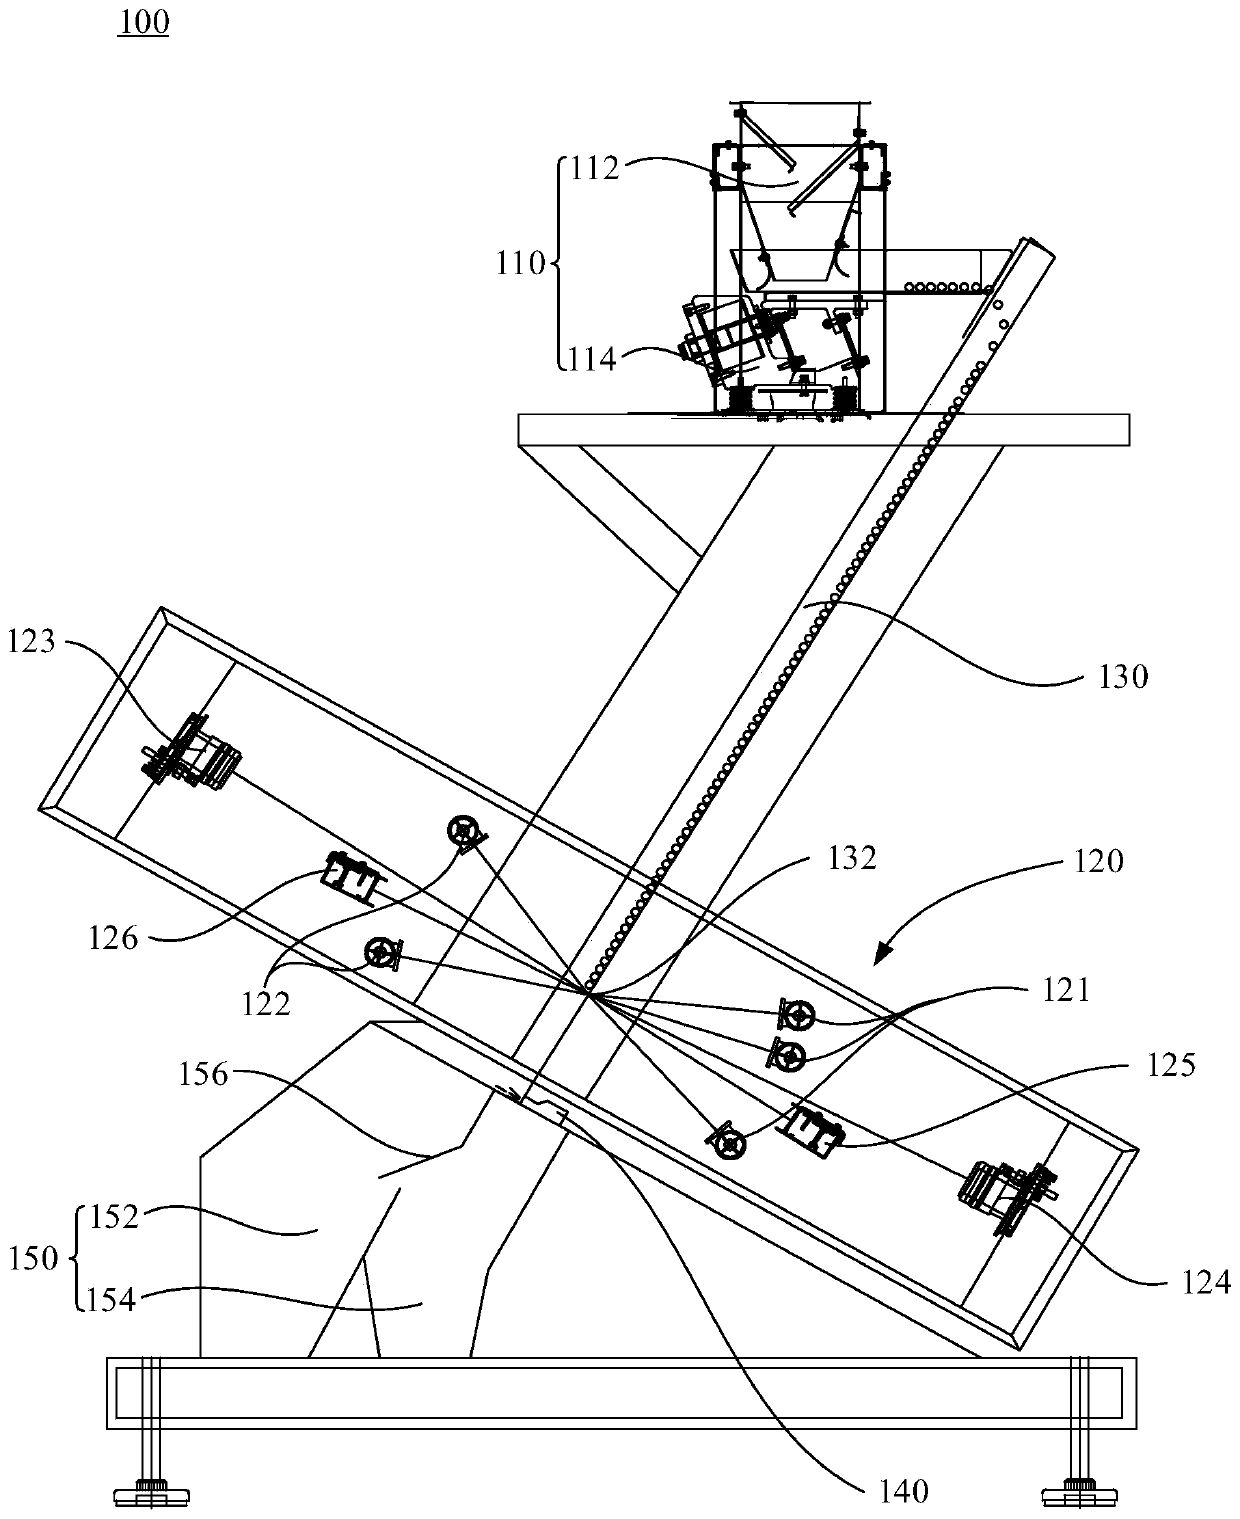 Unhulled rice sorting device and equipment